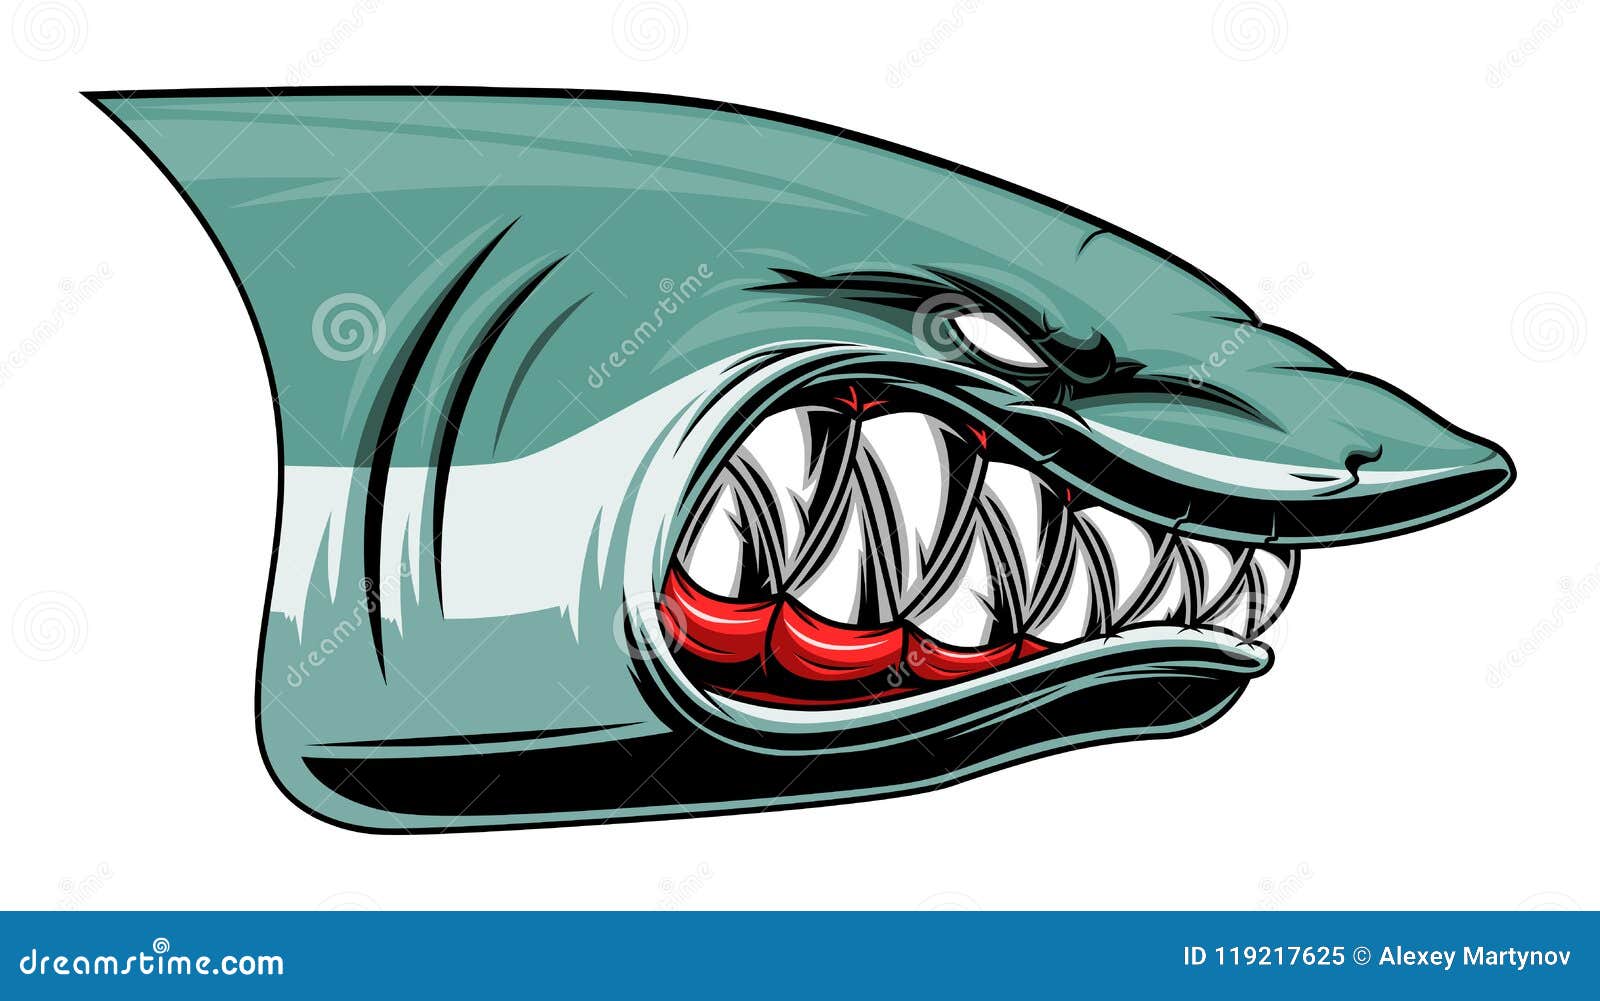 Angry shark head colored stock vector. Illustration of ...